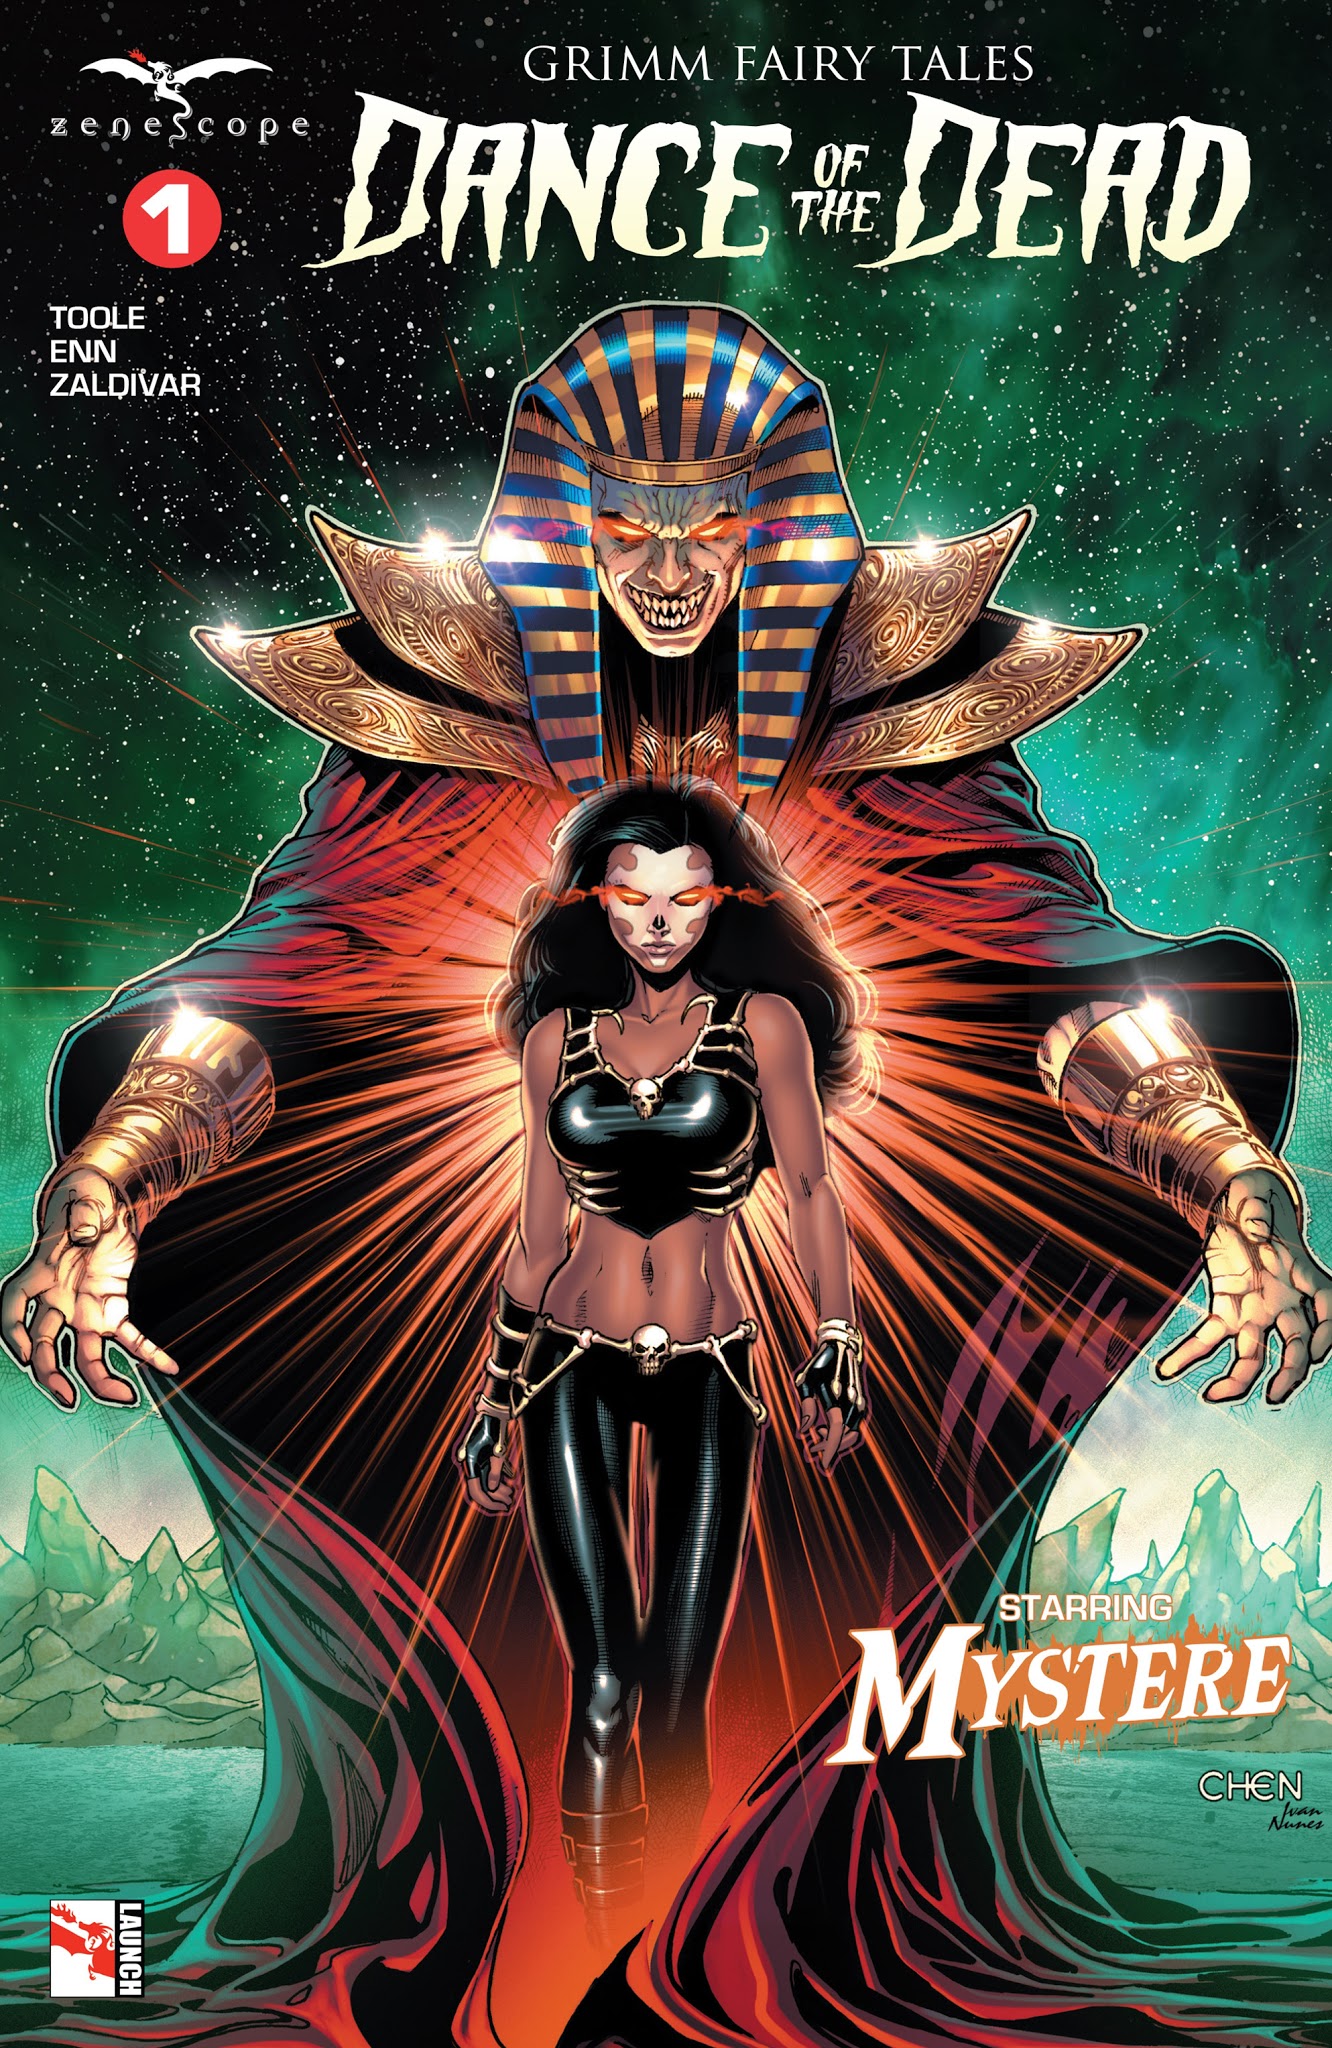 Read online Grimm Fairy Tales: Dance of the Dead comic -  Issue #1 - 1